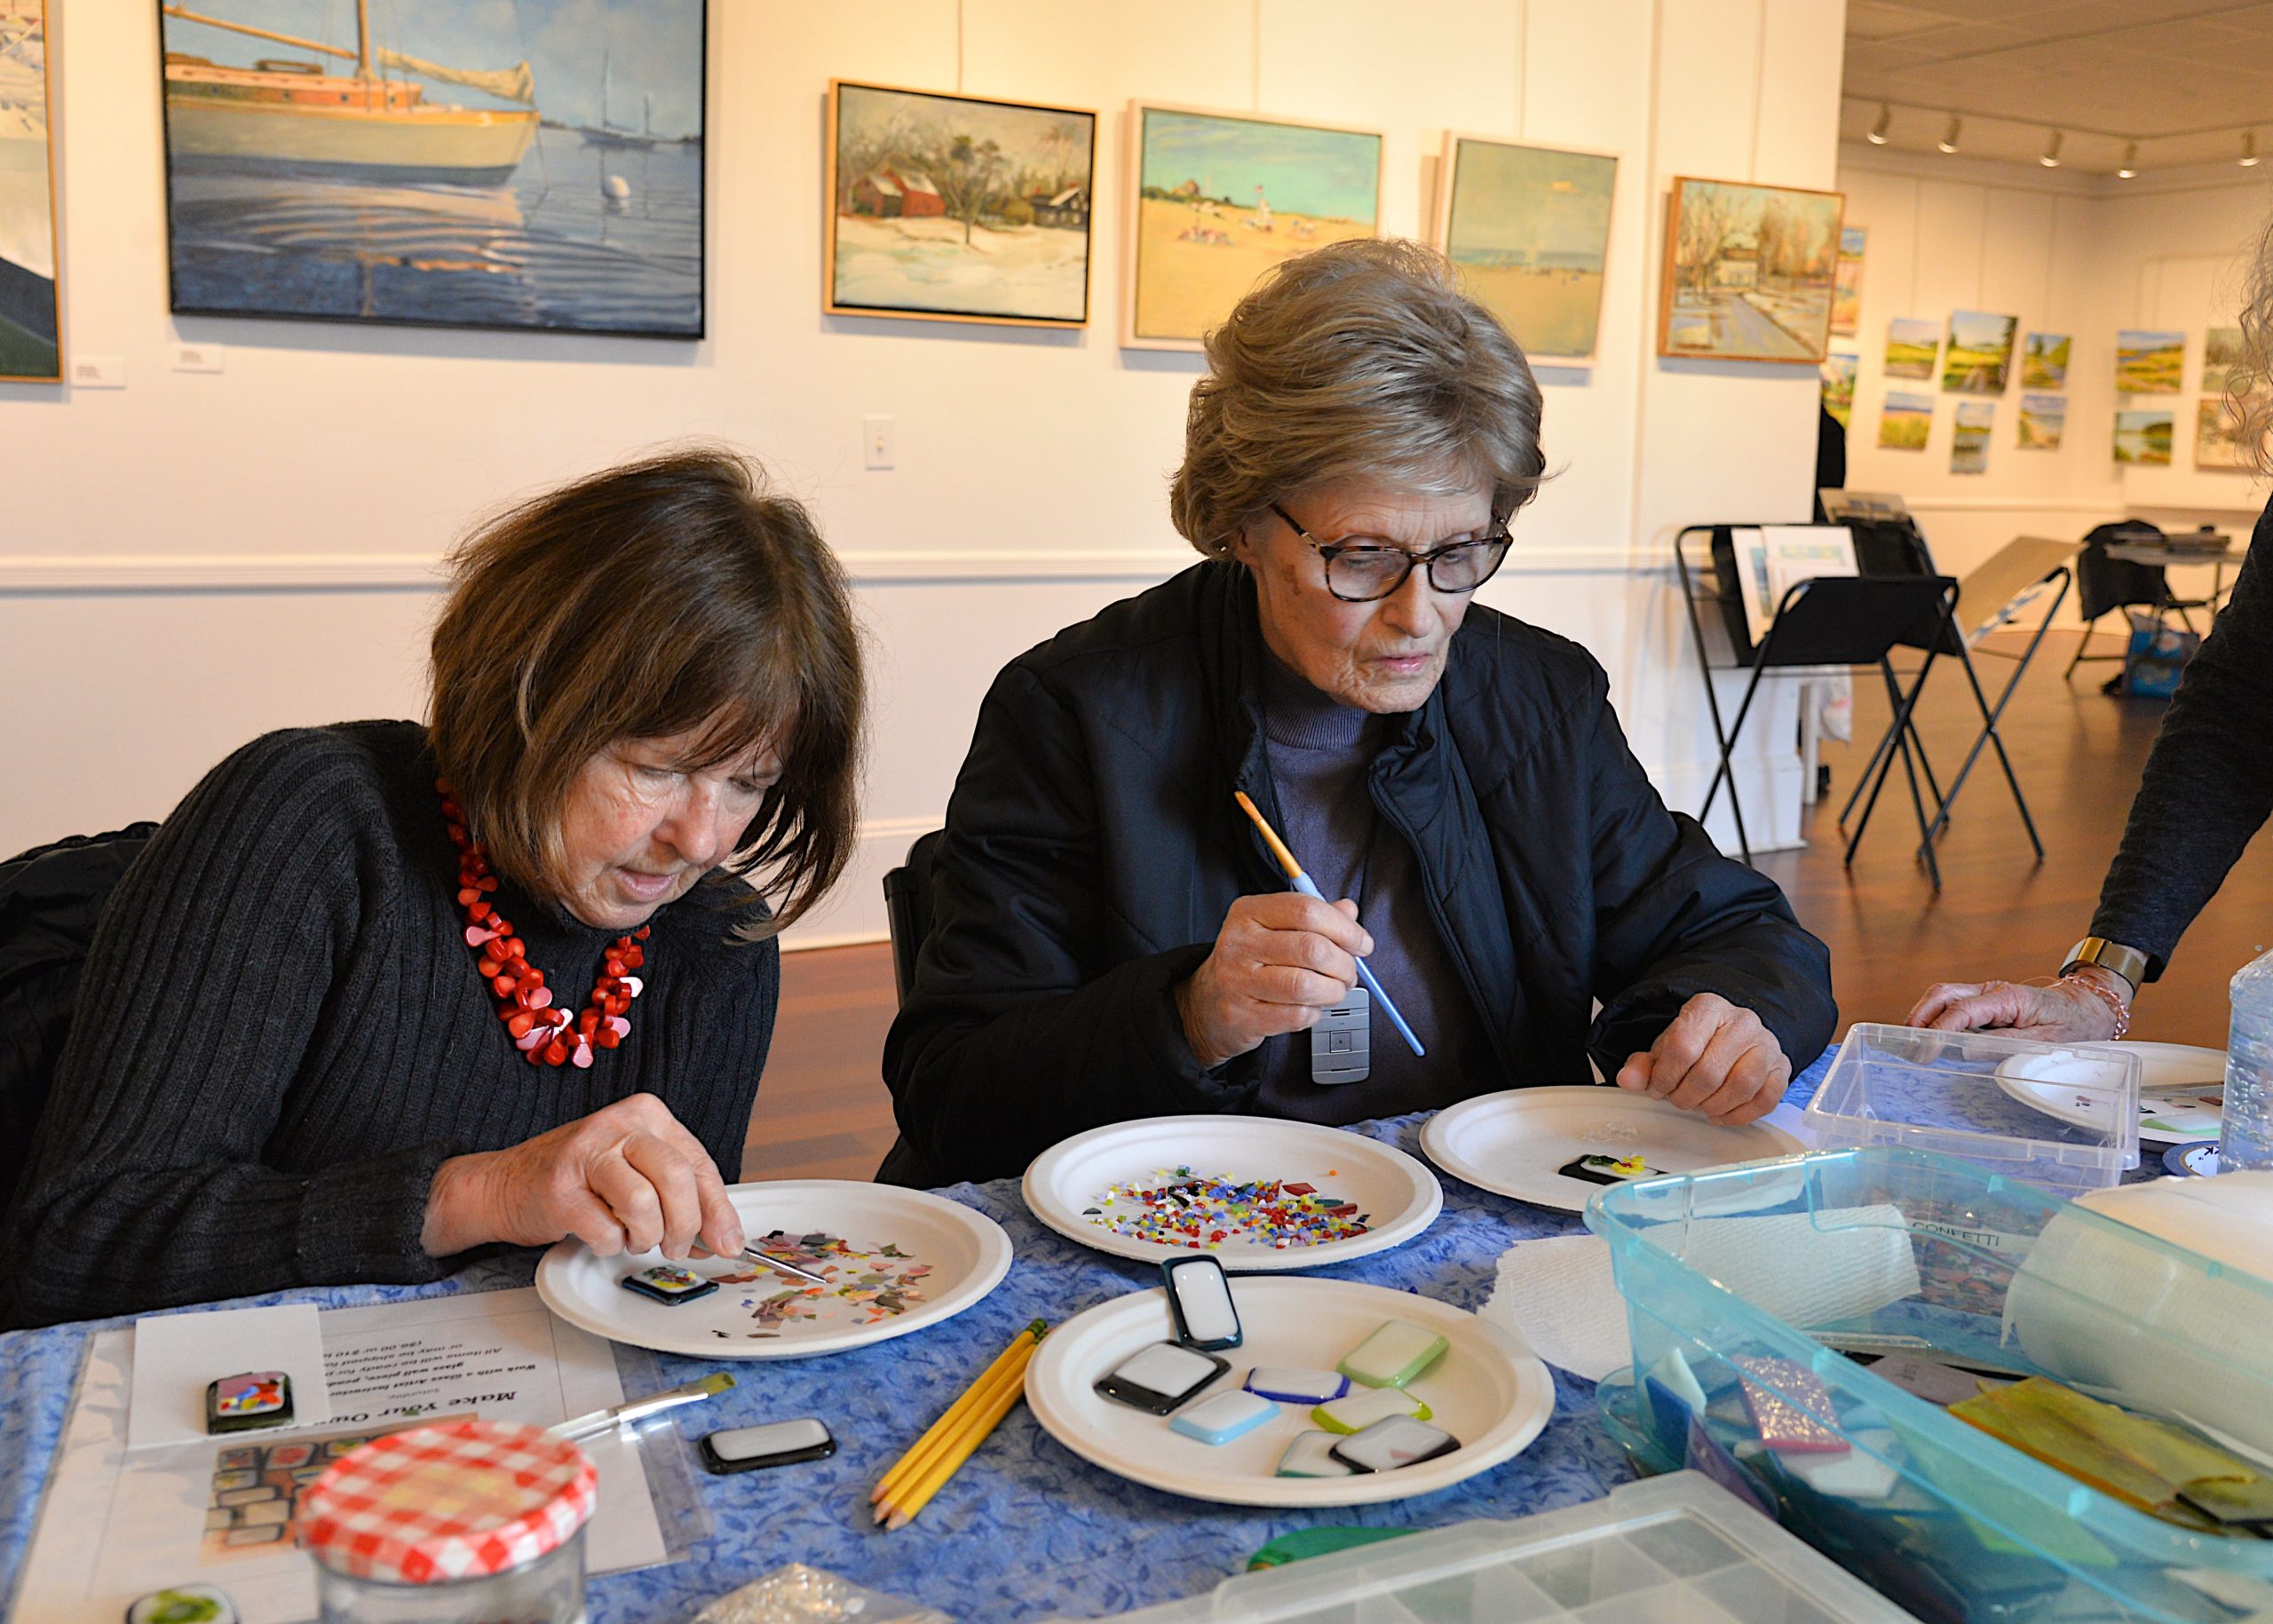 The Artists Alliance of East Hampton held an art exhibit at Ashawagh Hall this weekend, featuring then work of the Wednesday Group, Plein-Air artists using local scenery for inspiration There were also workshops in painting and glass fusion. Ursula Thomas and Annie Loris try their hand at learning glass fusing techniques. KYRIL BROMLEY 